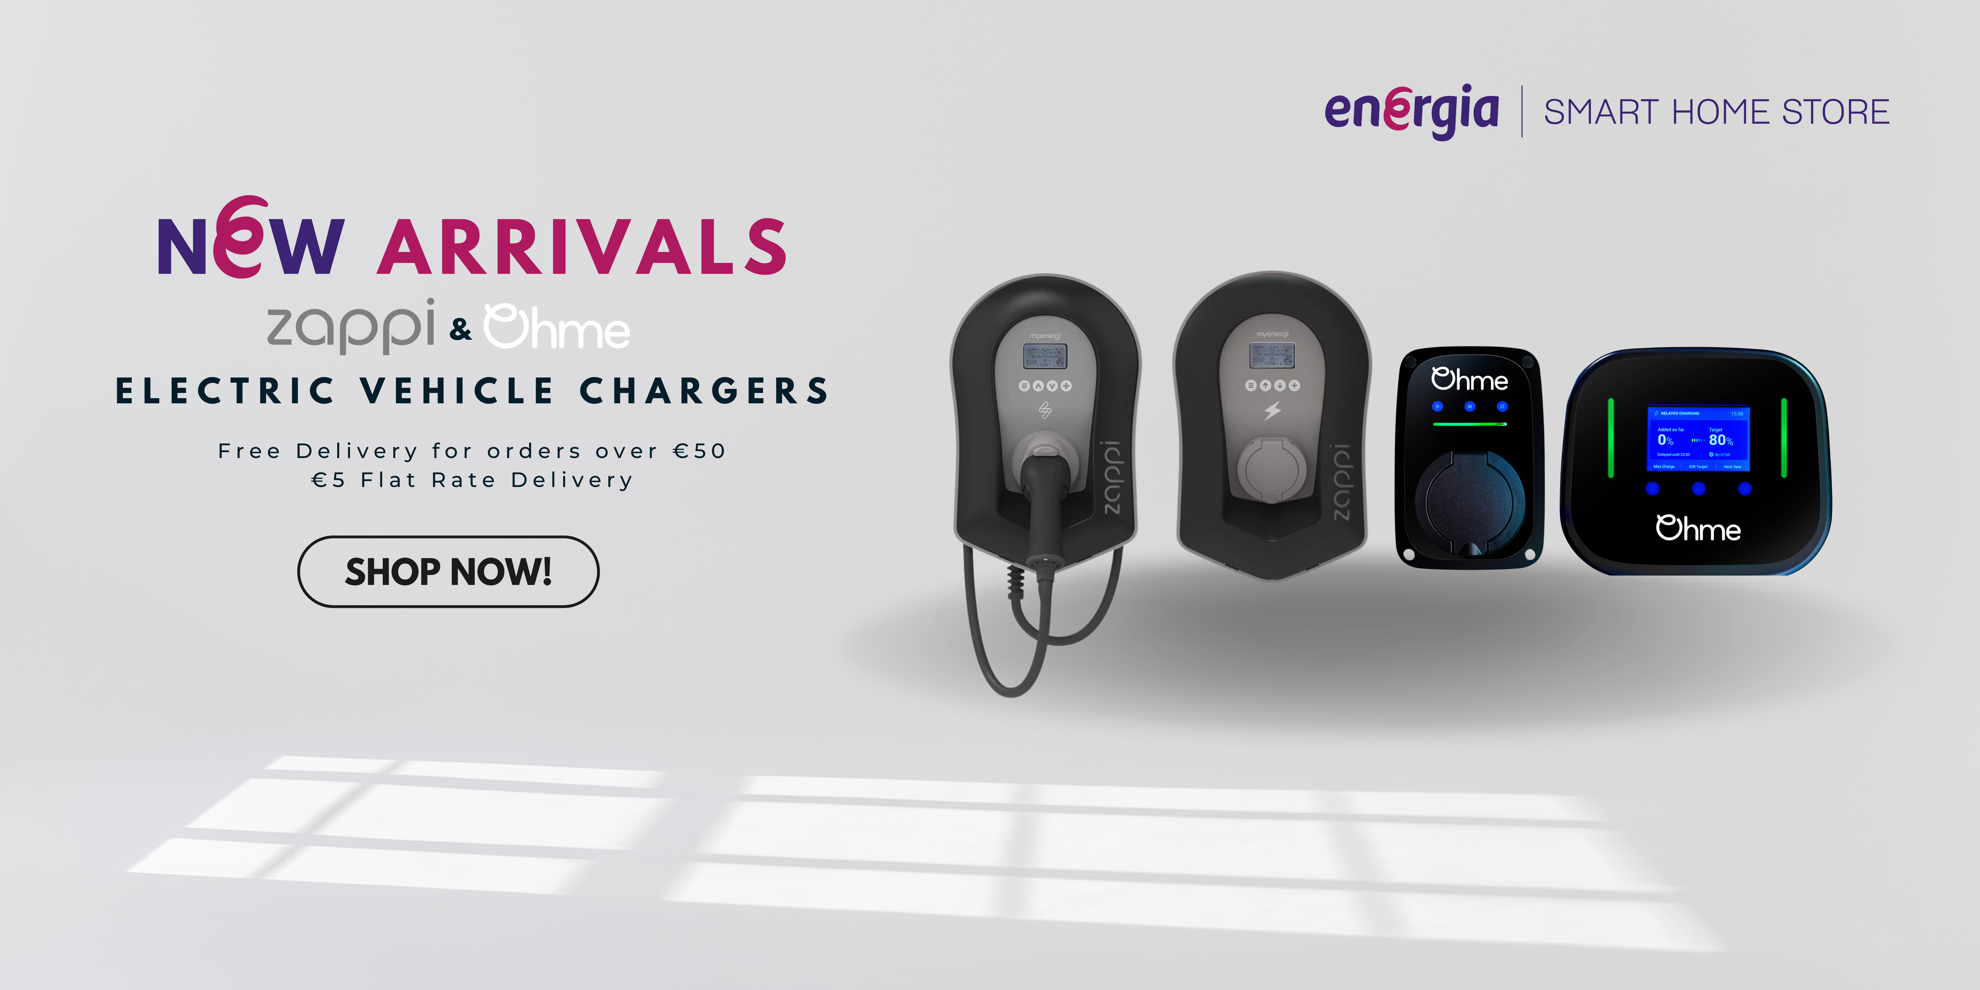 New EV ohme and zappi chargers now available on Energia's SMart home store